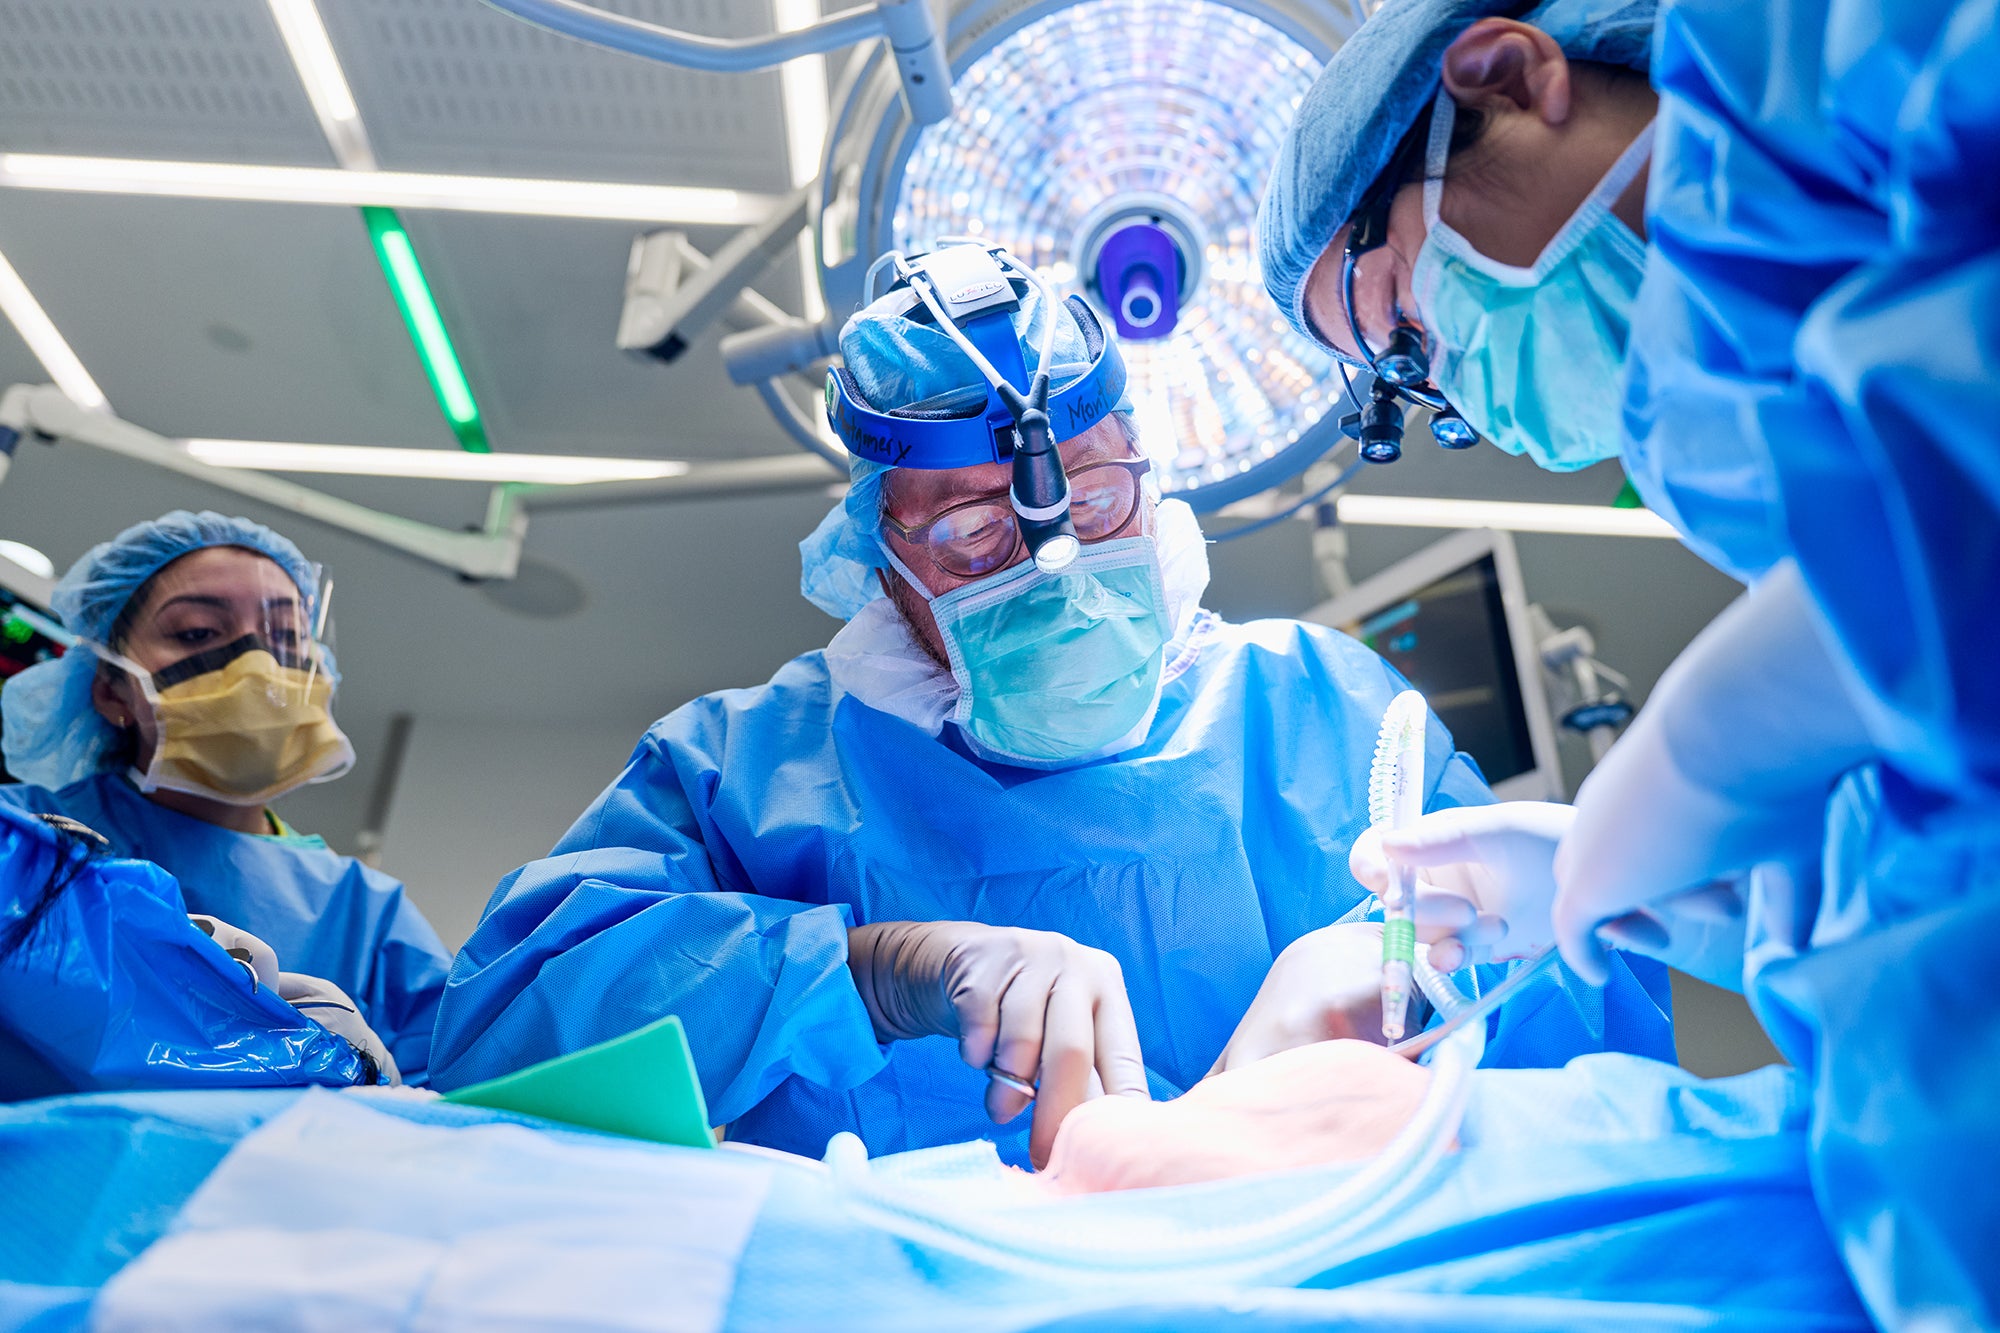 Two individuals wearing scrubs prepare the surgical site on a patient for xenotransplantation surgery while another individual in scrubs observes